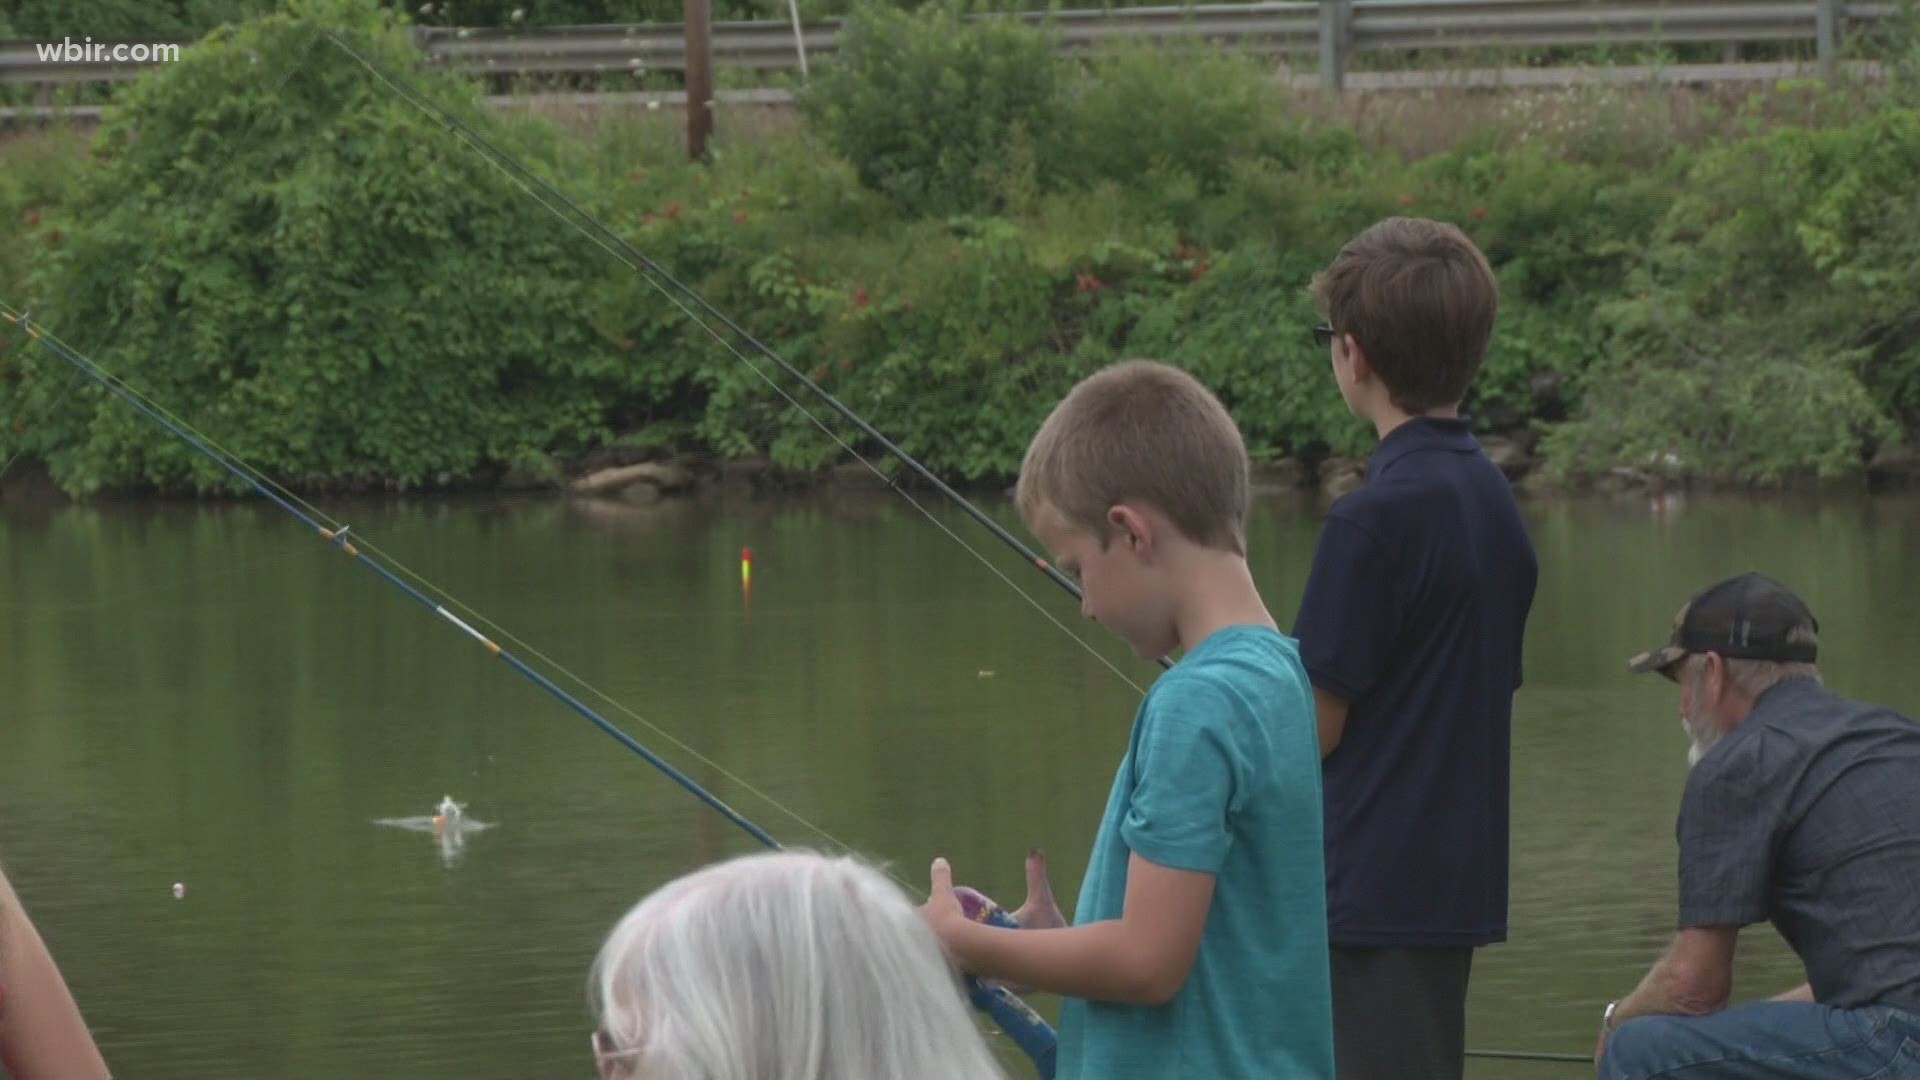 Free Fishing day is coming this Saturday. Tennesseans, including children, will be allowed to fish without a fishing license.